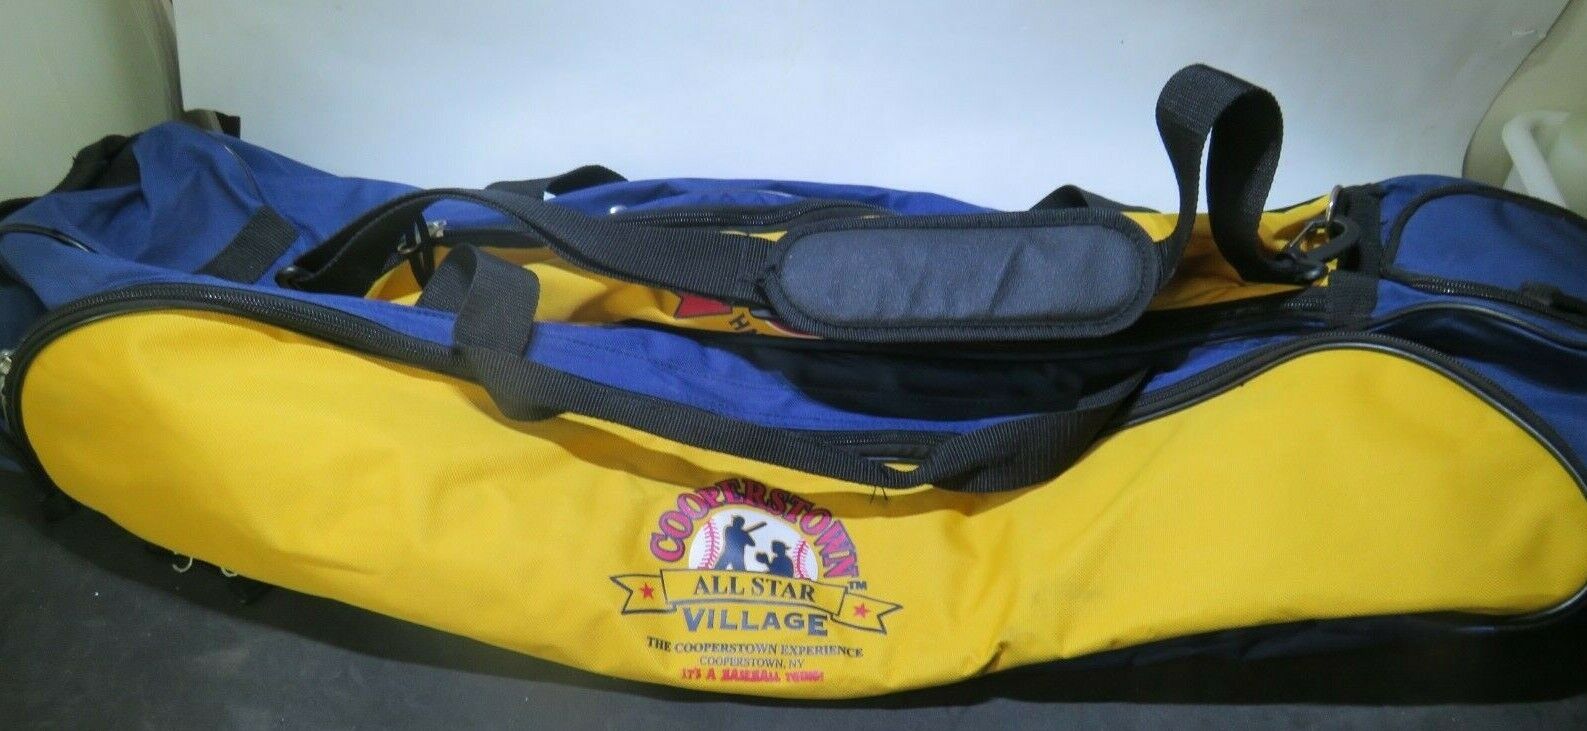 Cooperstown All Star Village Inventory cleanup selling sale Baseball Max 81% OFF Its Travel A Bag Equipment